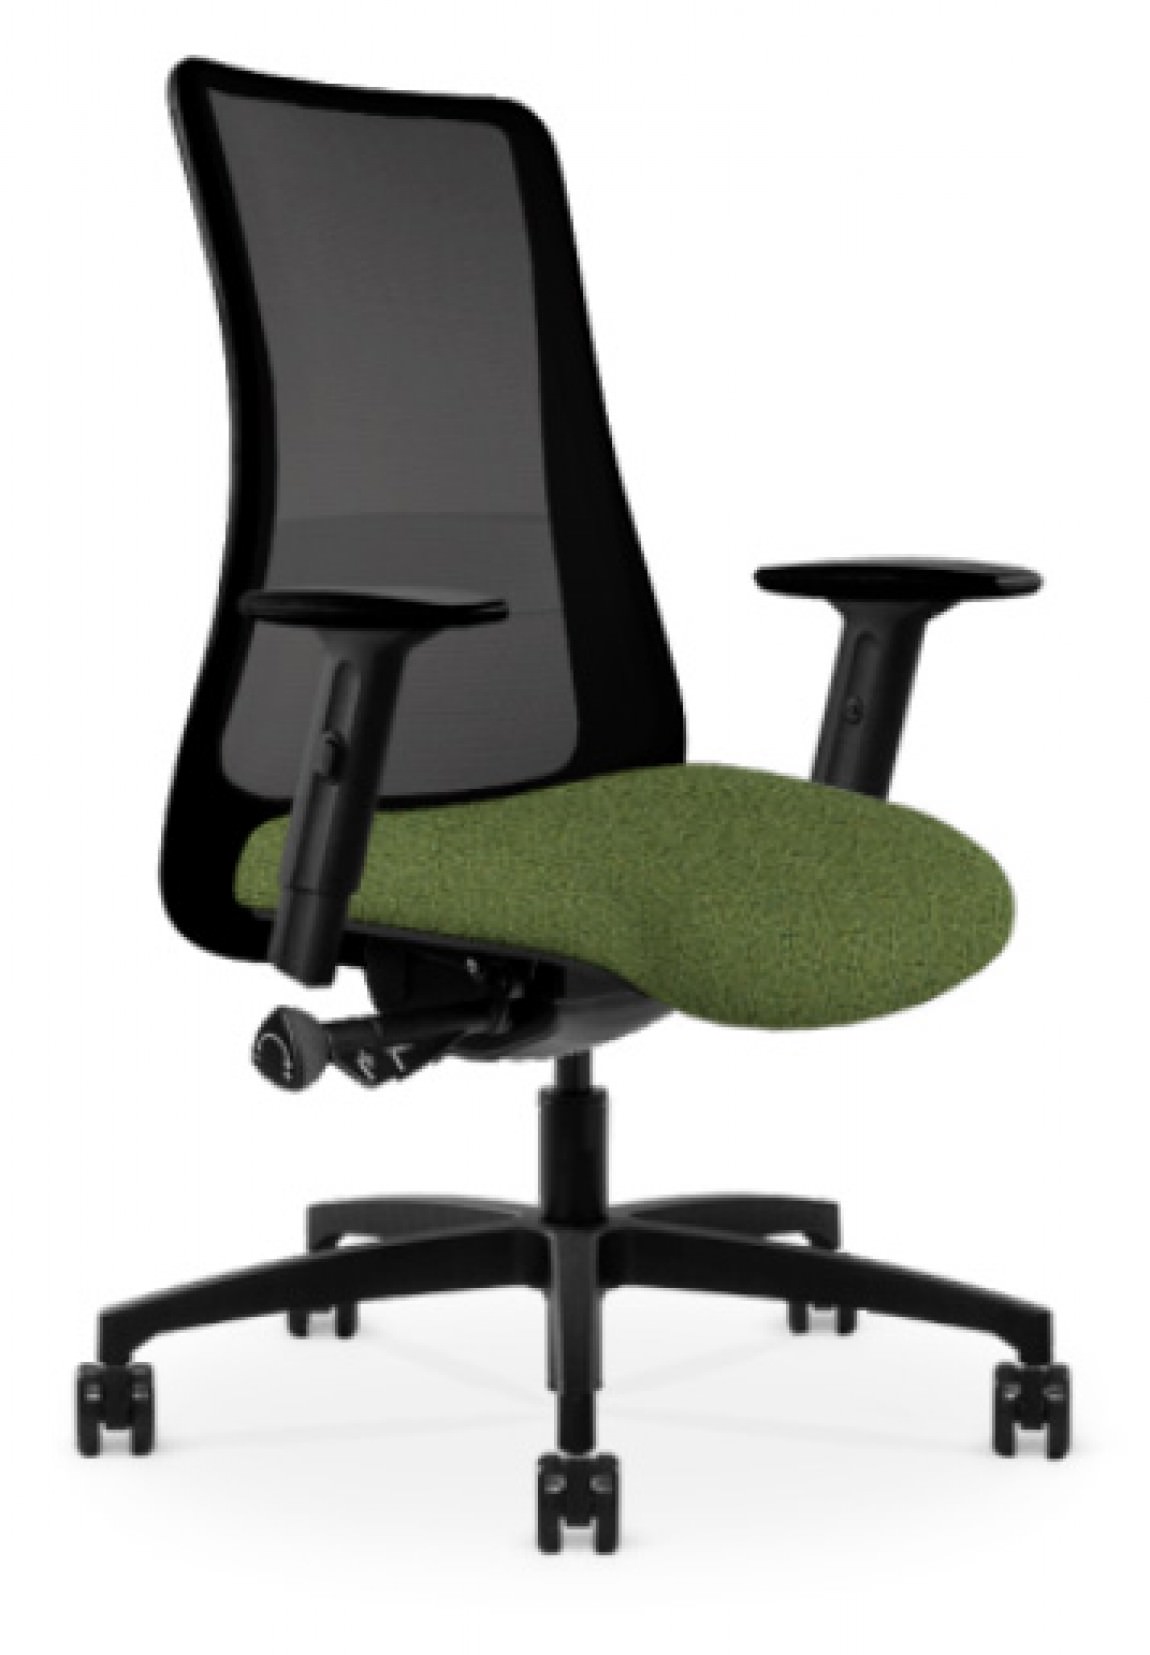 Black Copper Mesh Antimicrobial Office Chair w/ Grass Hue Seat